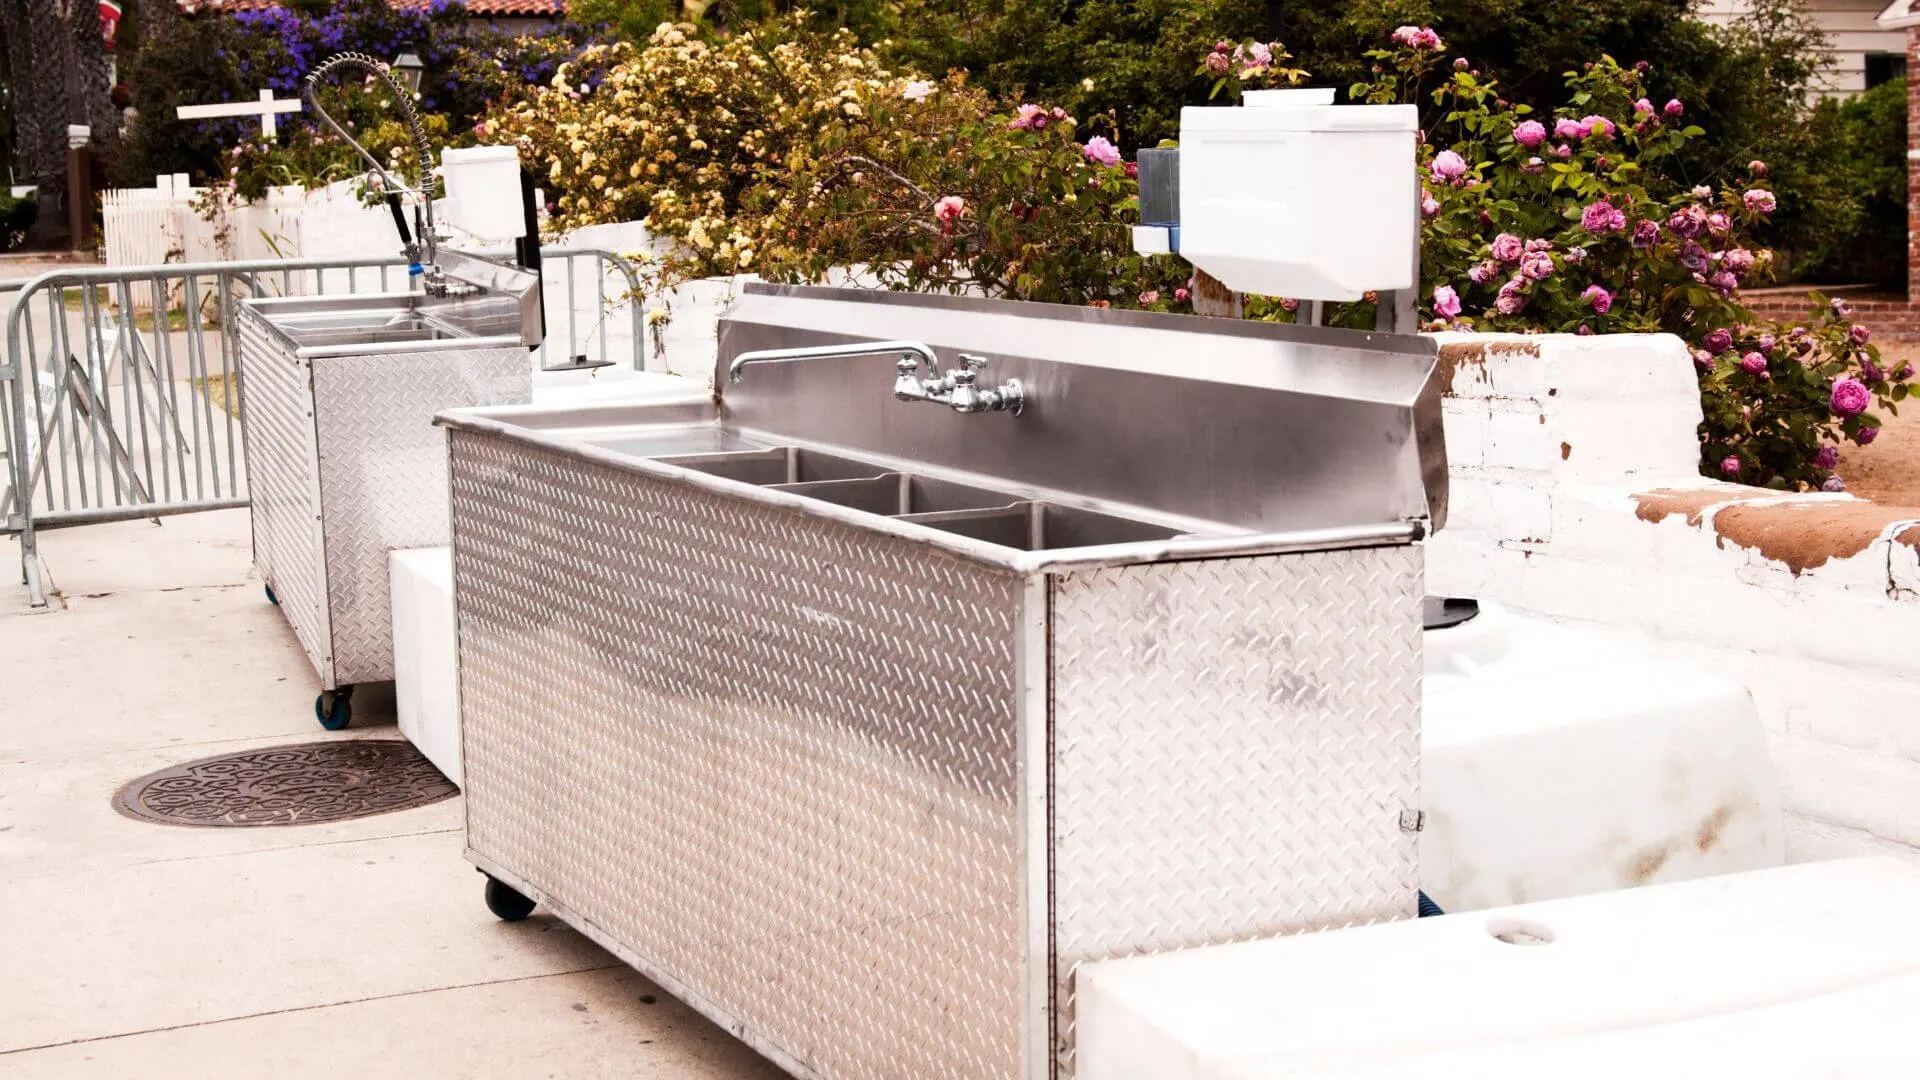 Portable Sinks in Event Spaces